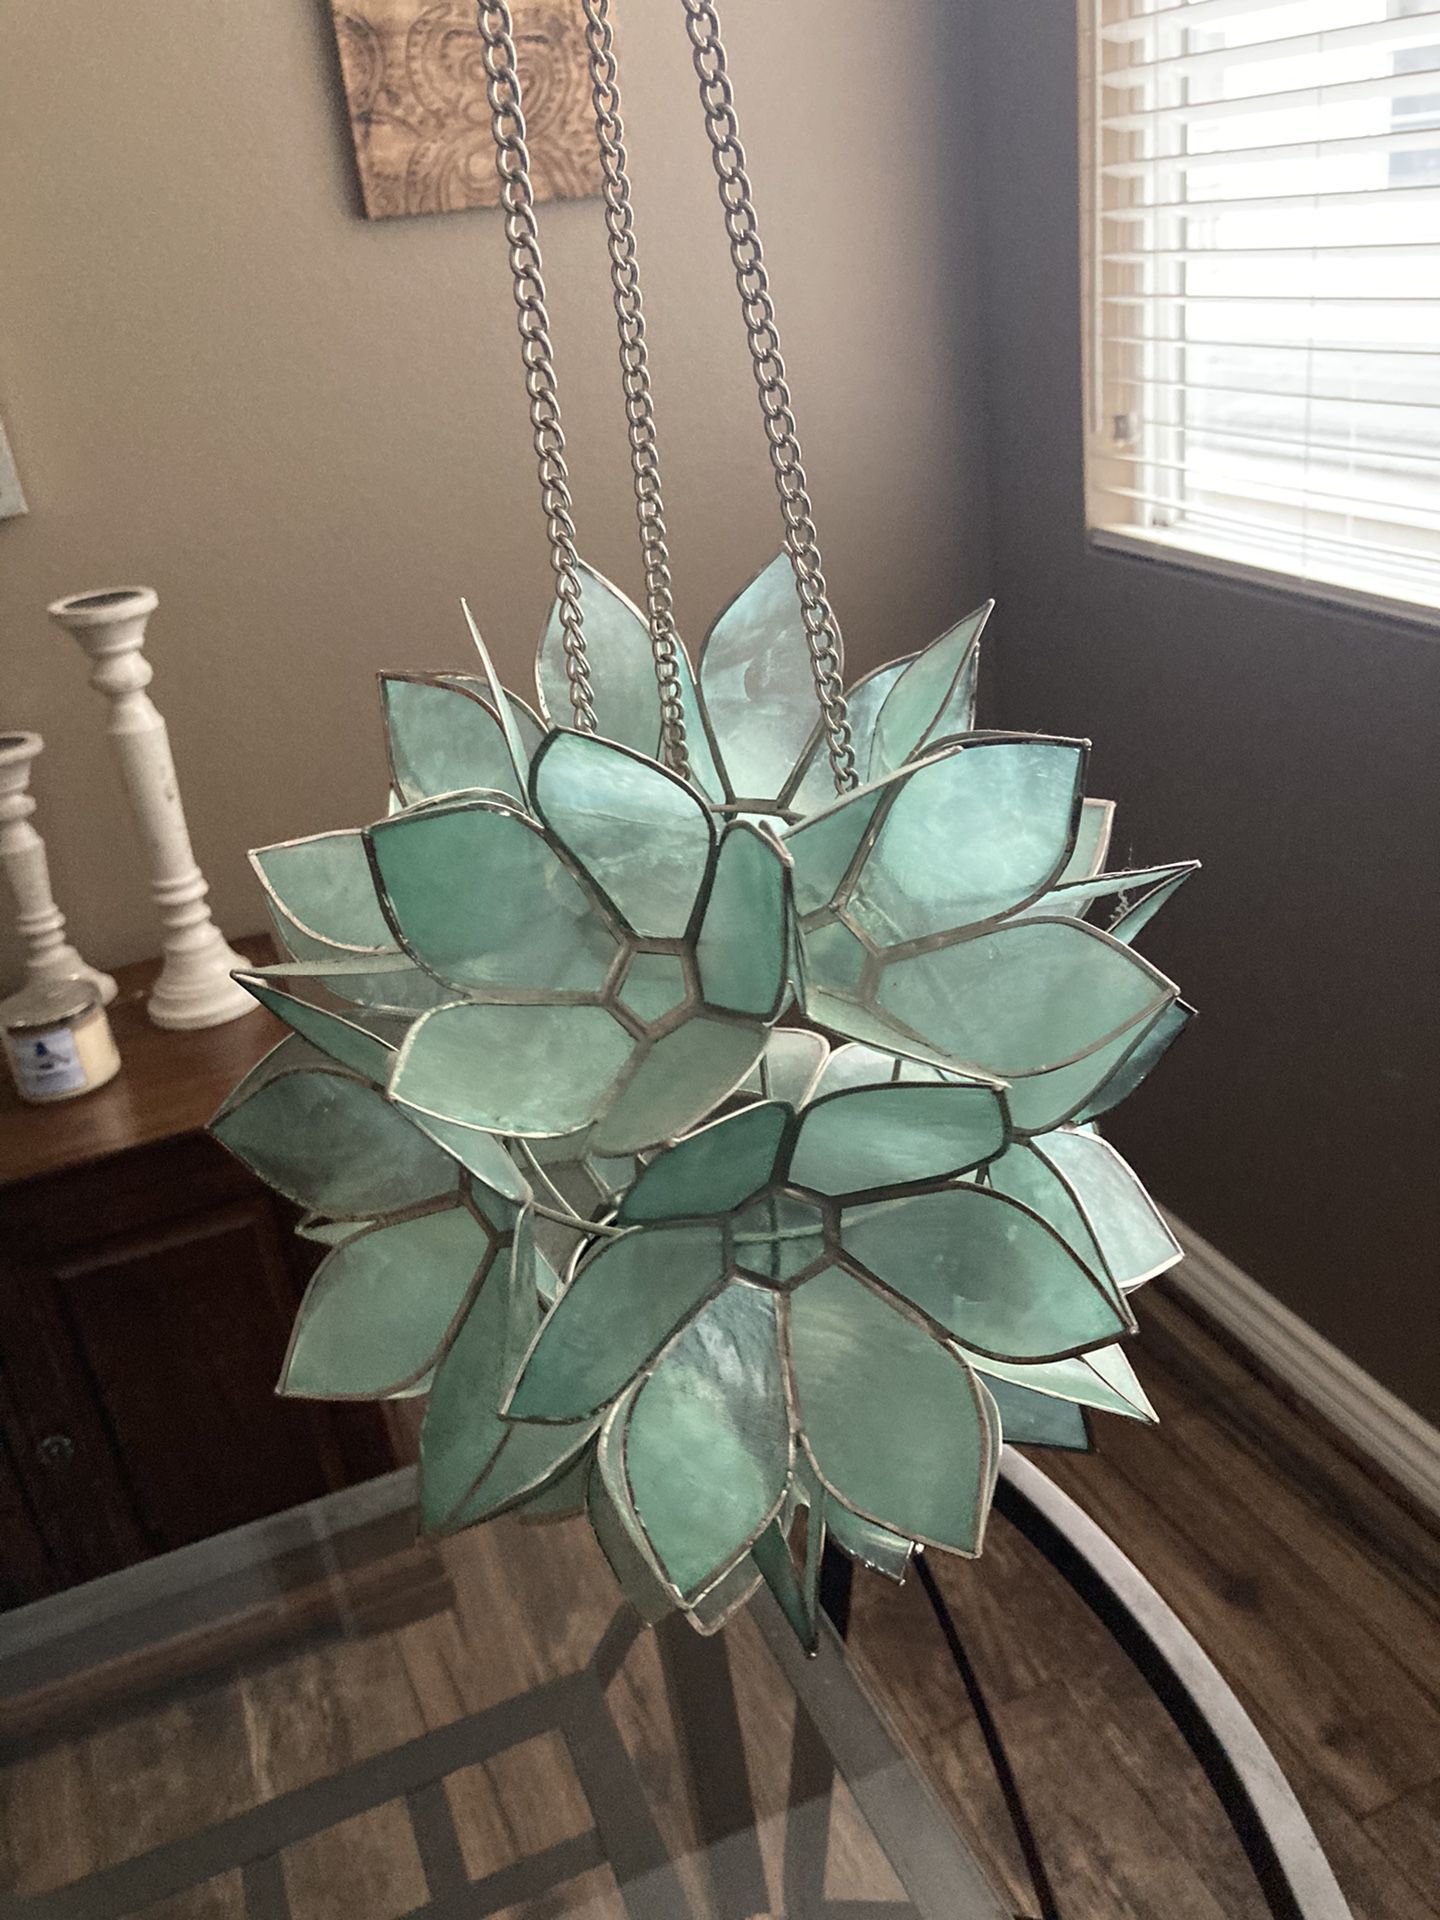 Turquoise Stained Glass Flower Hanging Candle Holder